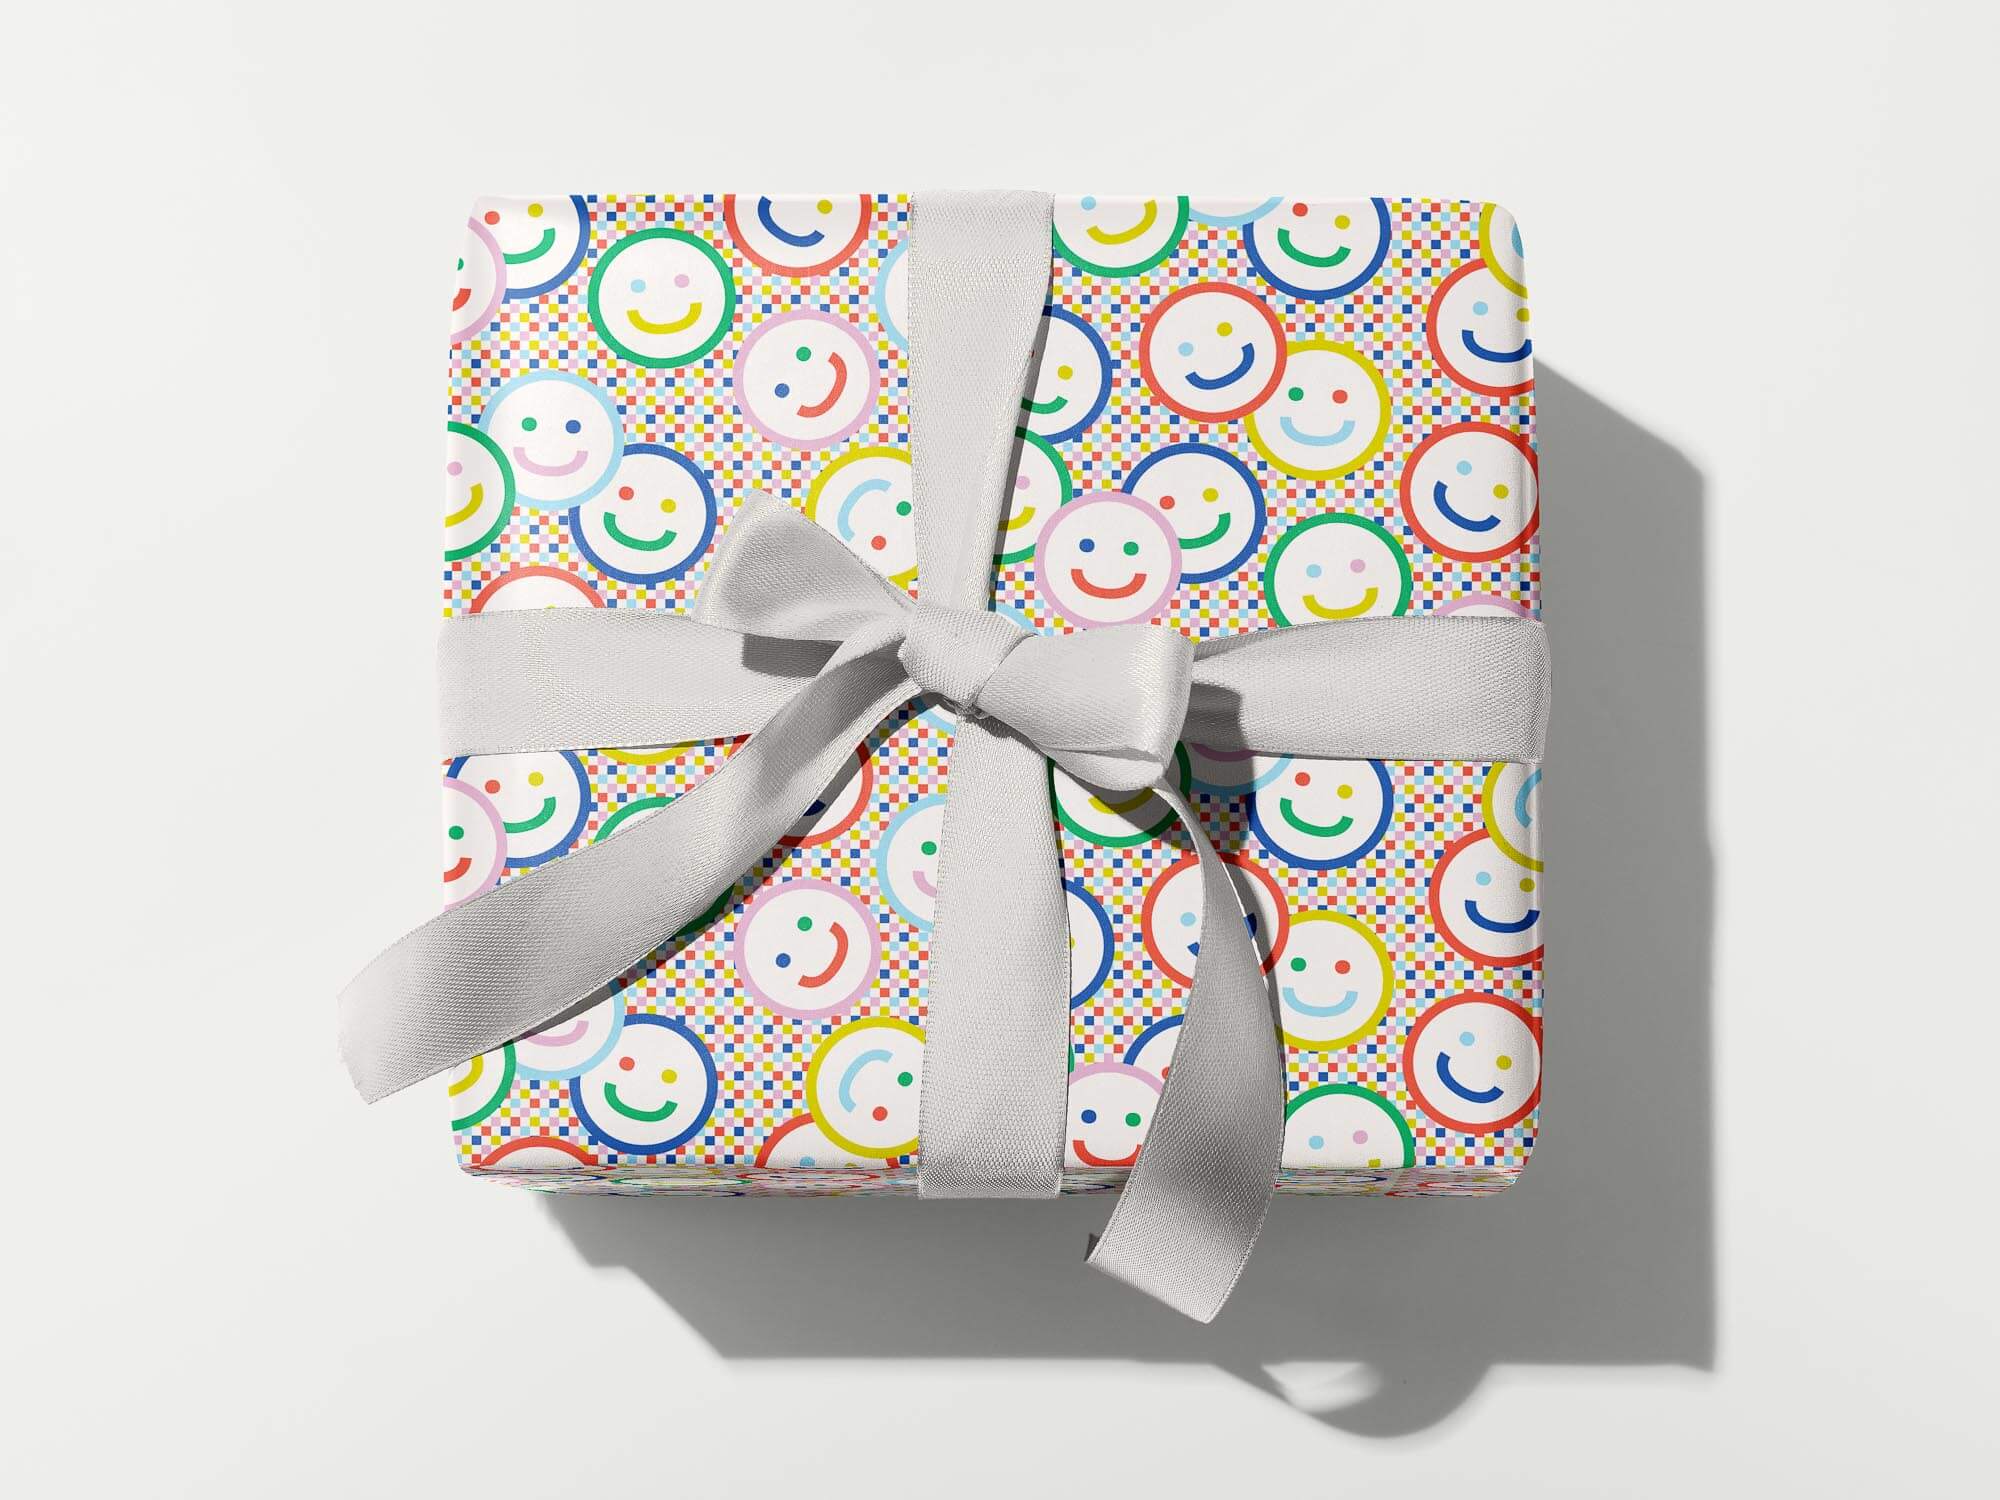 Rainbow smiley face and checker pattern wrapping paper. Colorful, modern, gift wrapping sheets with fun prints and patterns by @mydarlin_bk. Made in USA.